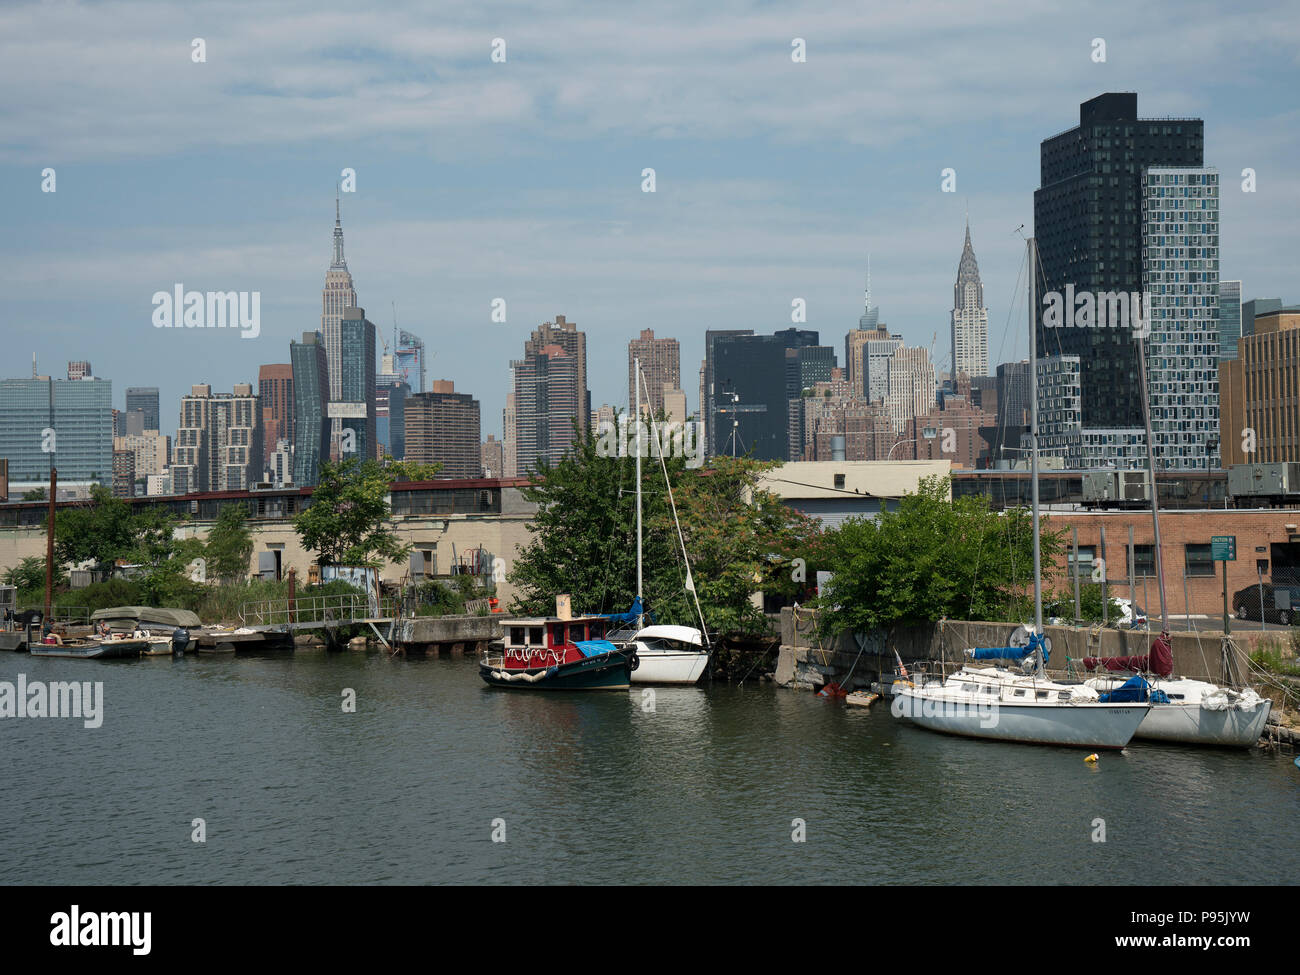 The skyline of Manhattan’s east side as seen from Newtown Creek, an estuary of Long Island Sound that runs between Brooklyn and Queens. Stock Photo